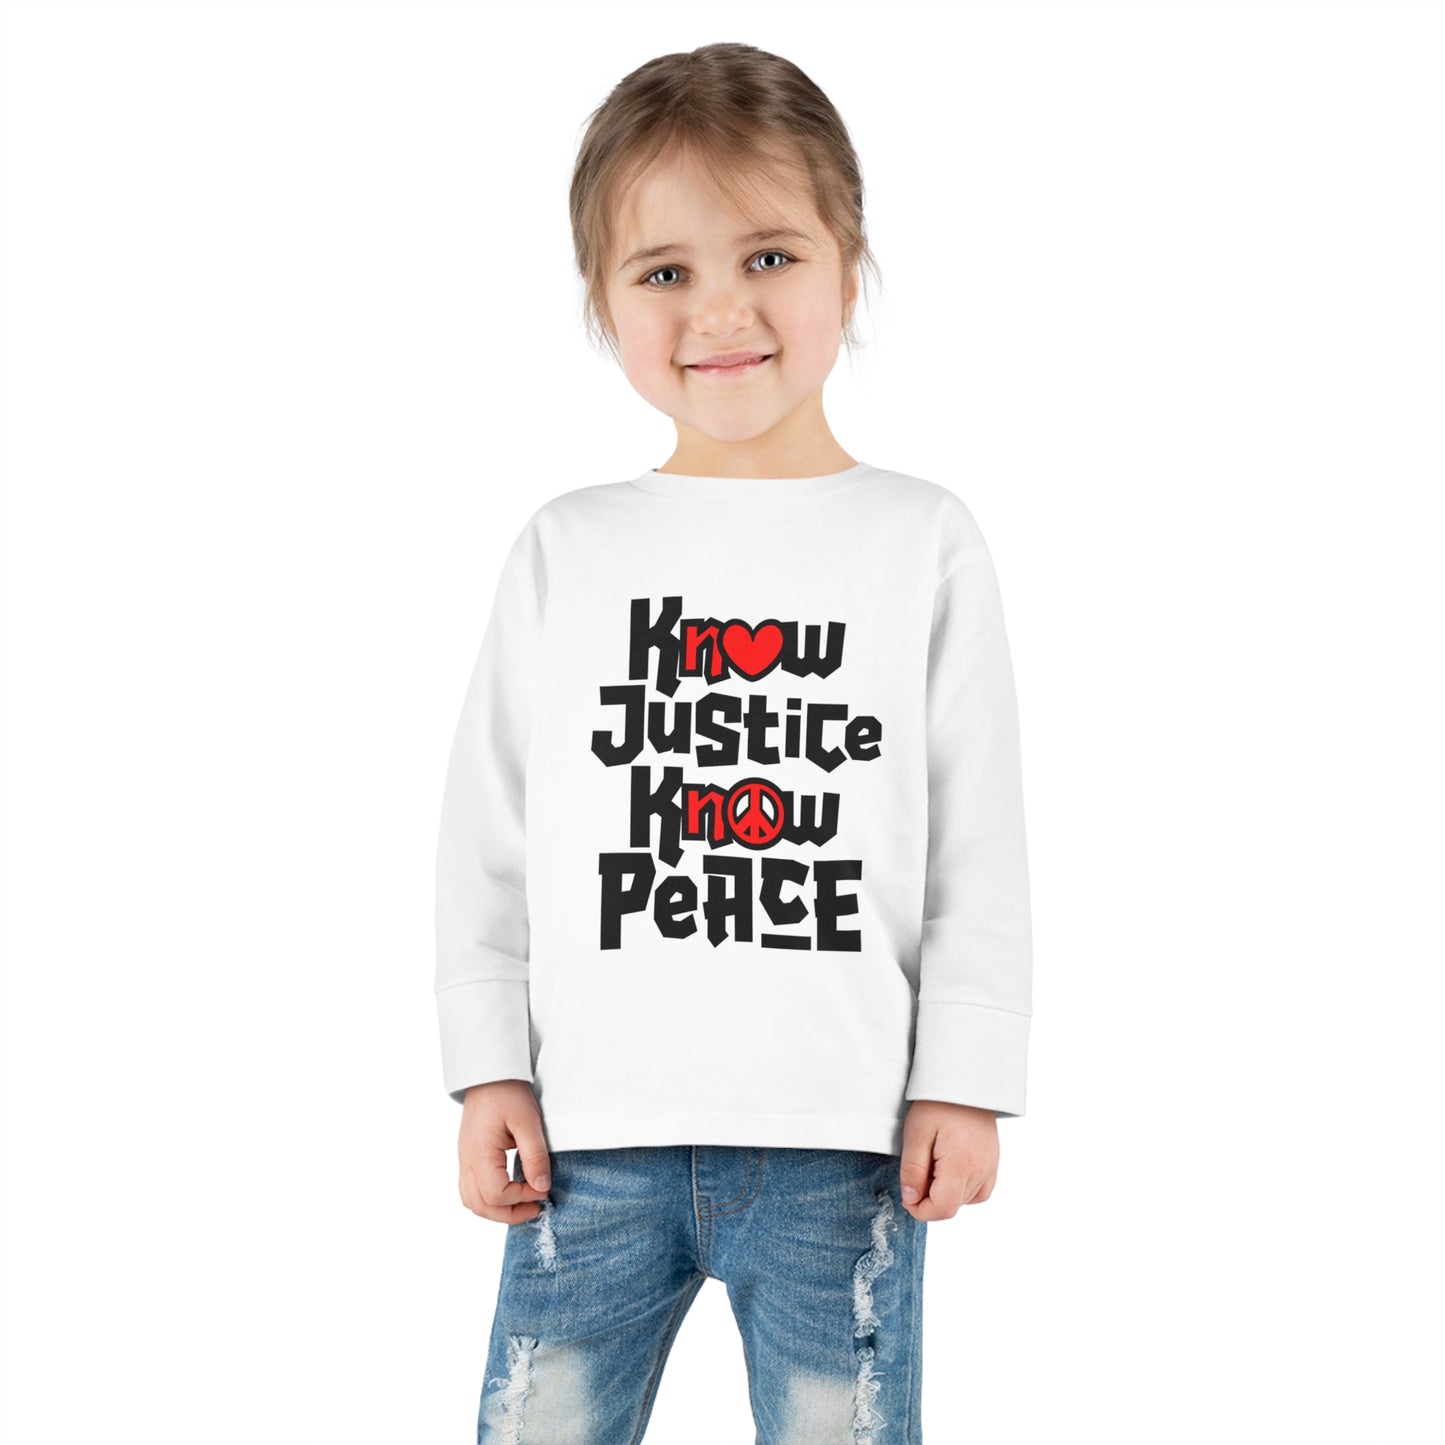 “Know Justice, Know Peace (Heart of Awareness)” Toddler Long Sleeve Tee